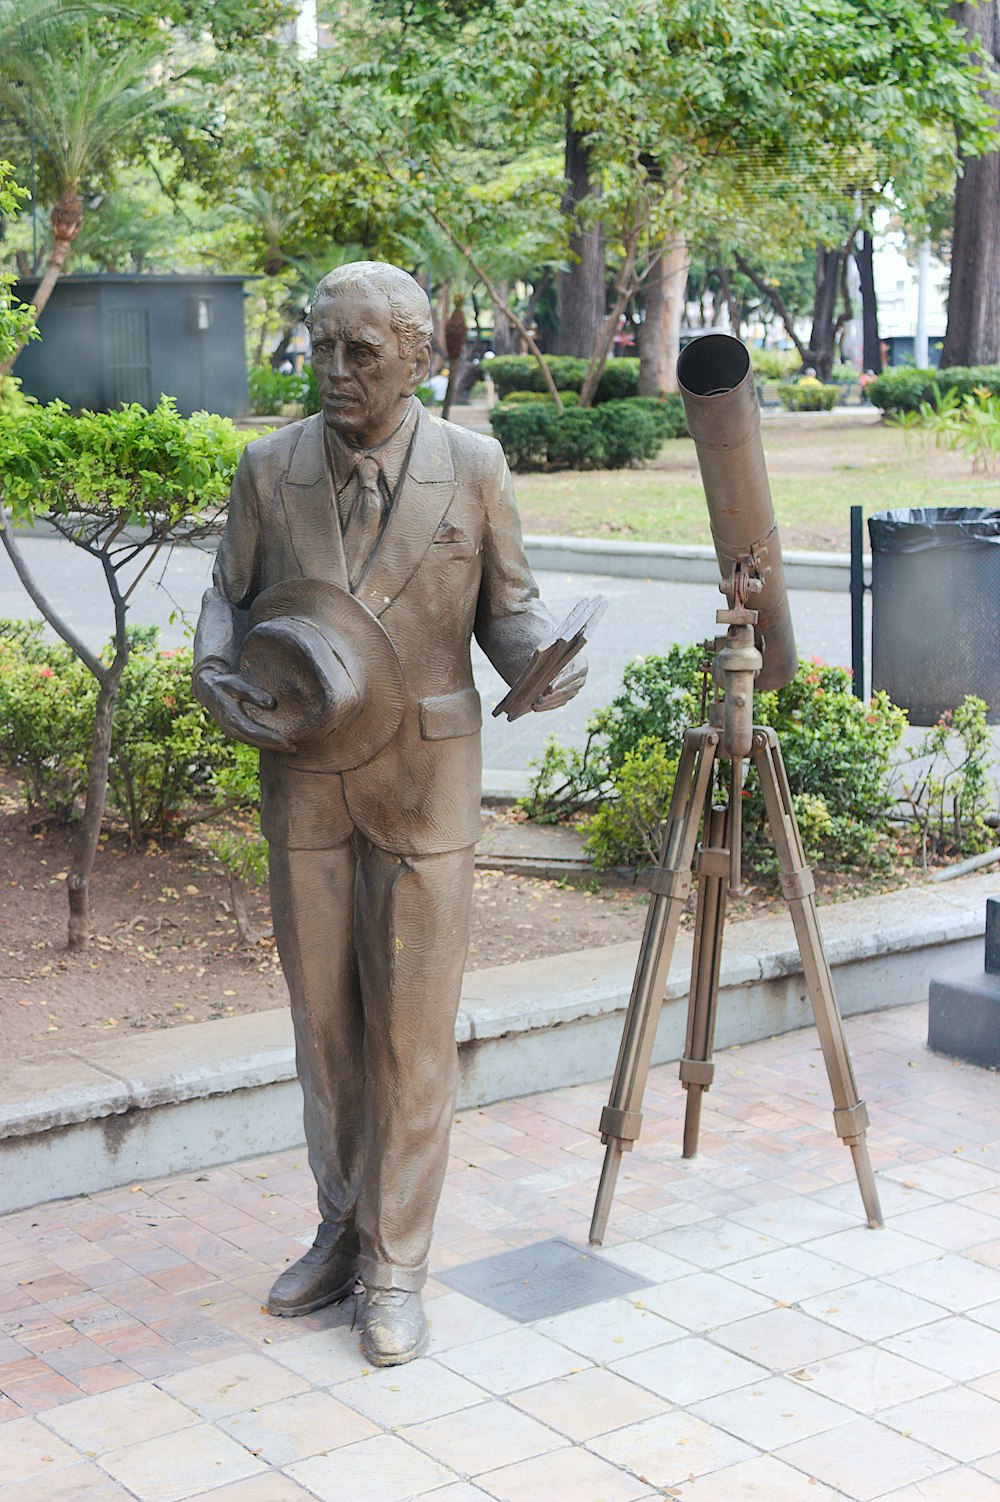 a statue of a person holding a hammer